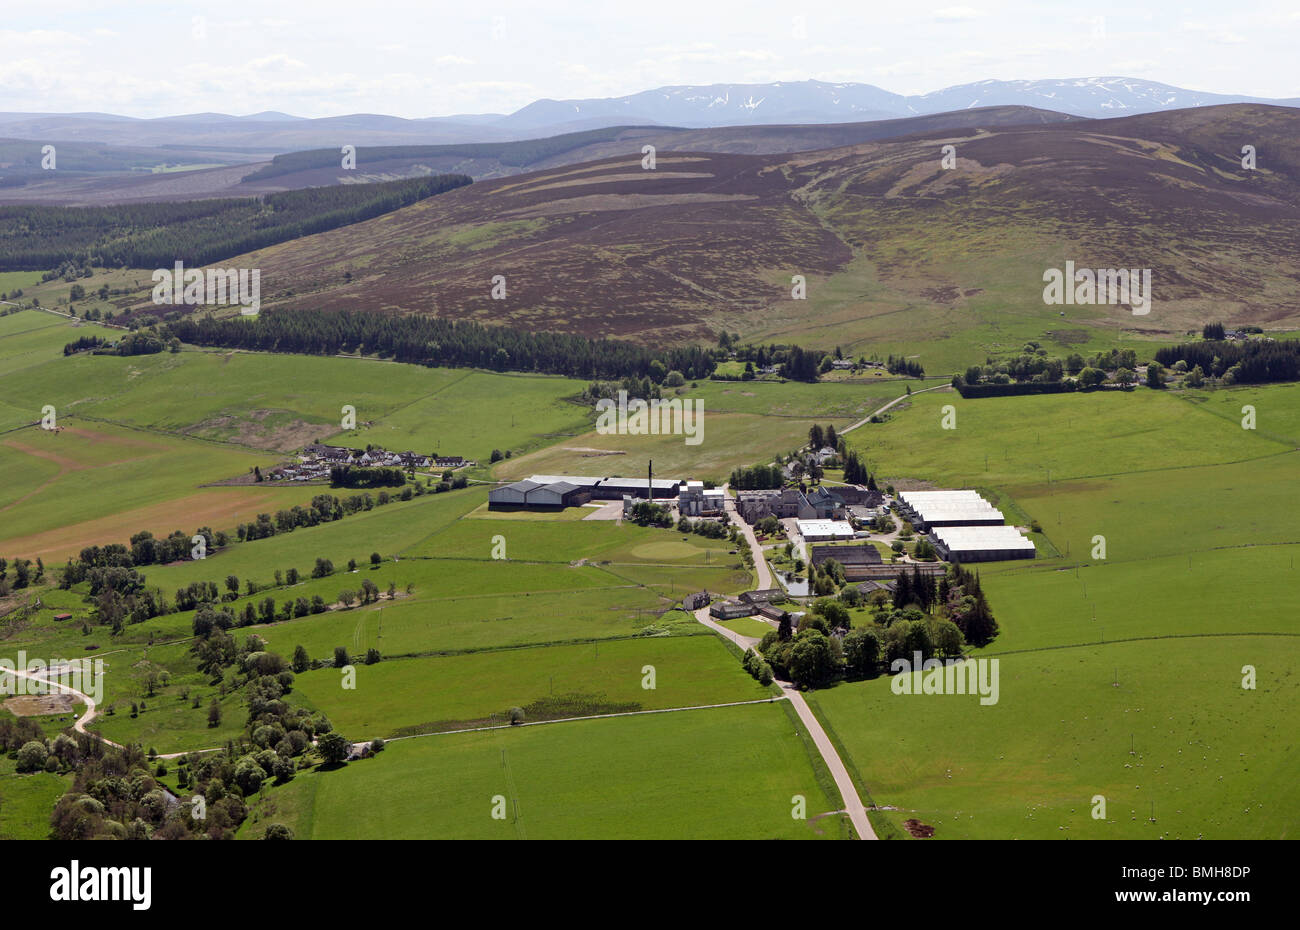 Aerial photo of the world famous Glenlivet scotch whisky distillery in the highlands of Scotland near Ballindalloch on Speyside Stock Photo